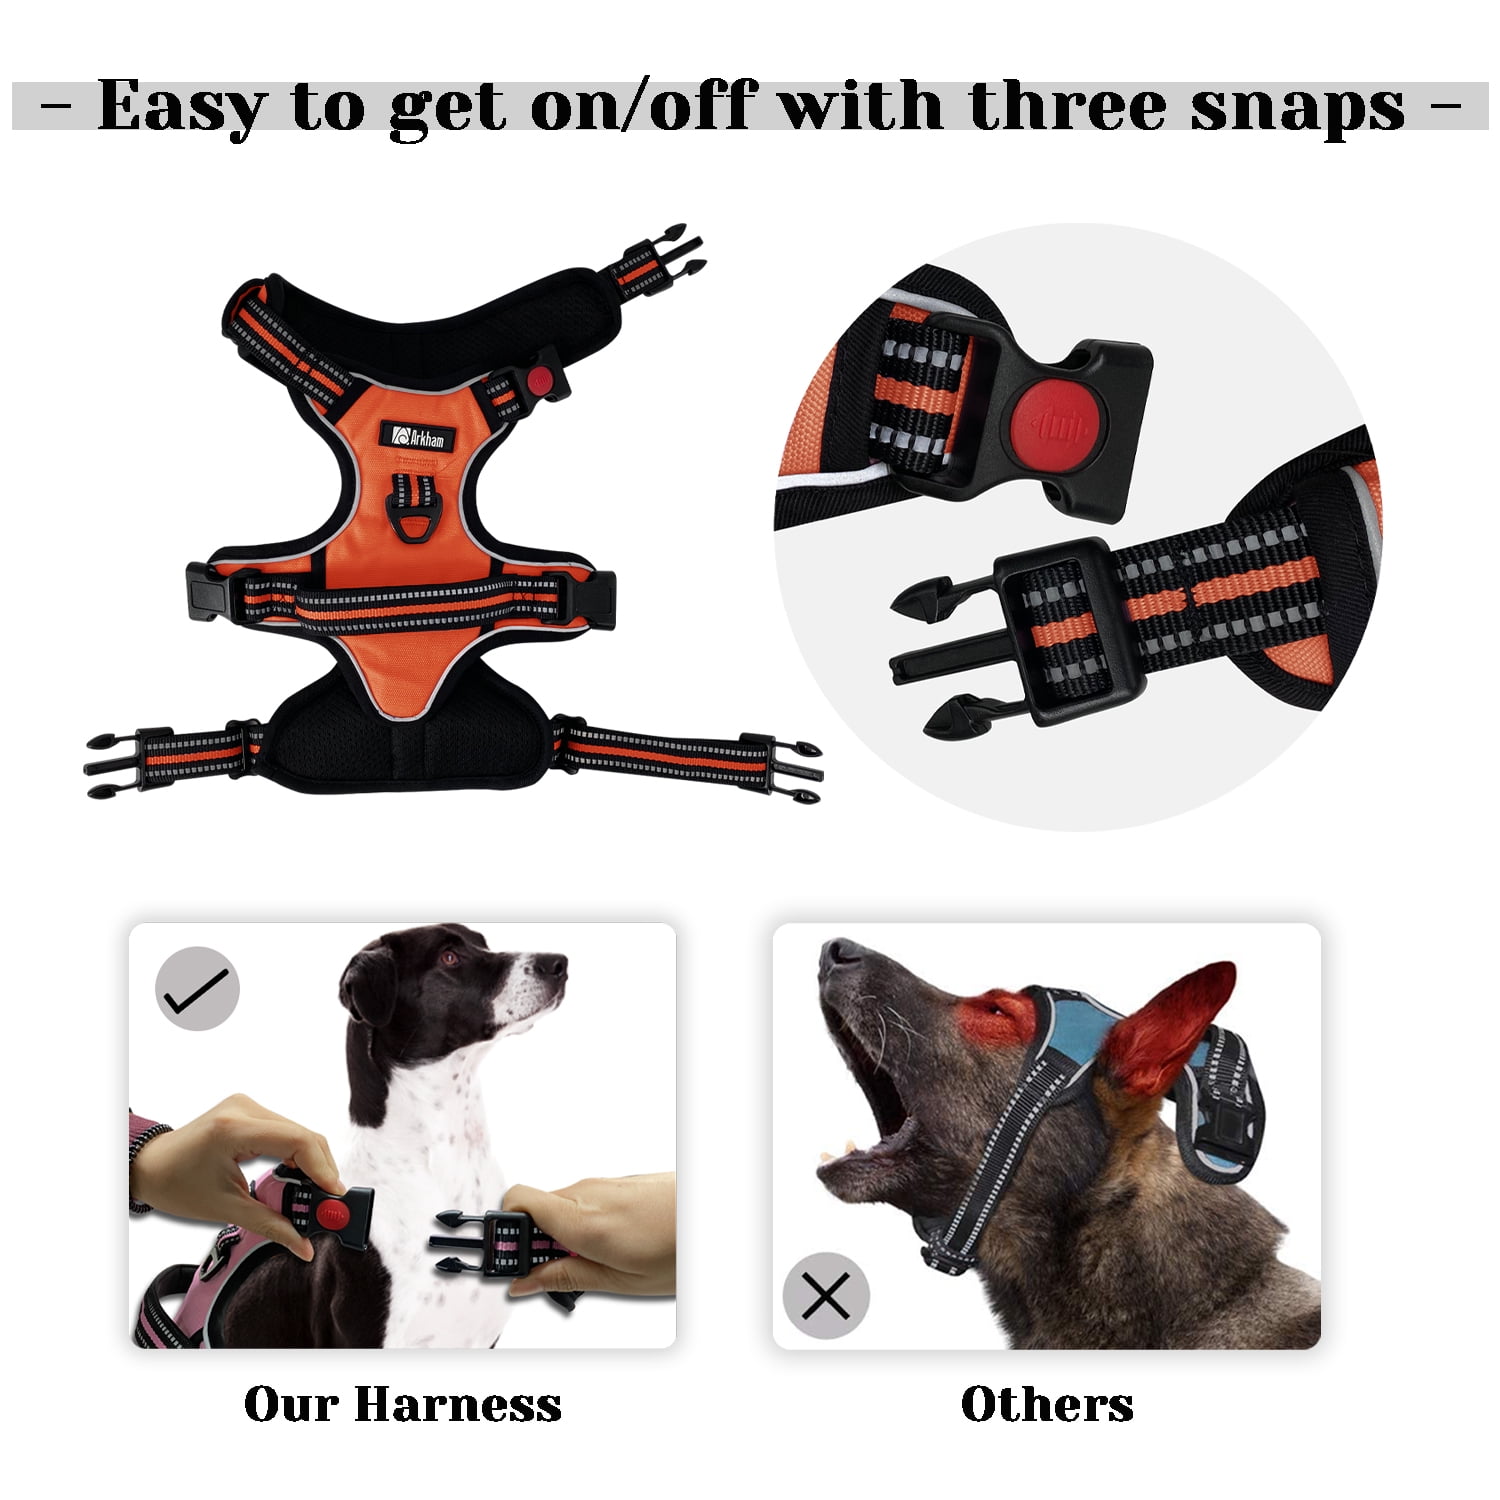 Nobleza Dog Vest Harness, Reflective No Pull Dog Harness with Handle and Soft Padding, Adjustable Easy on Grip Harness for Dogs with Velcro for